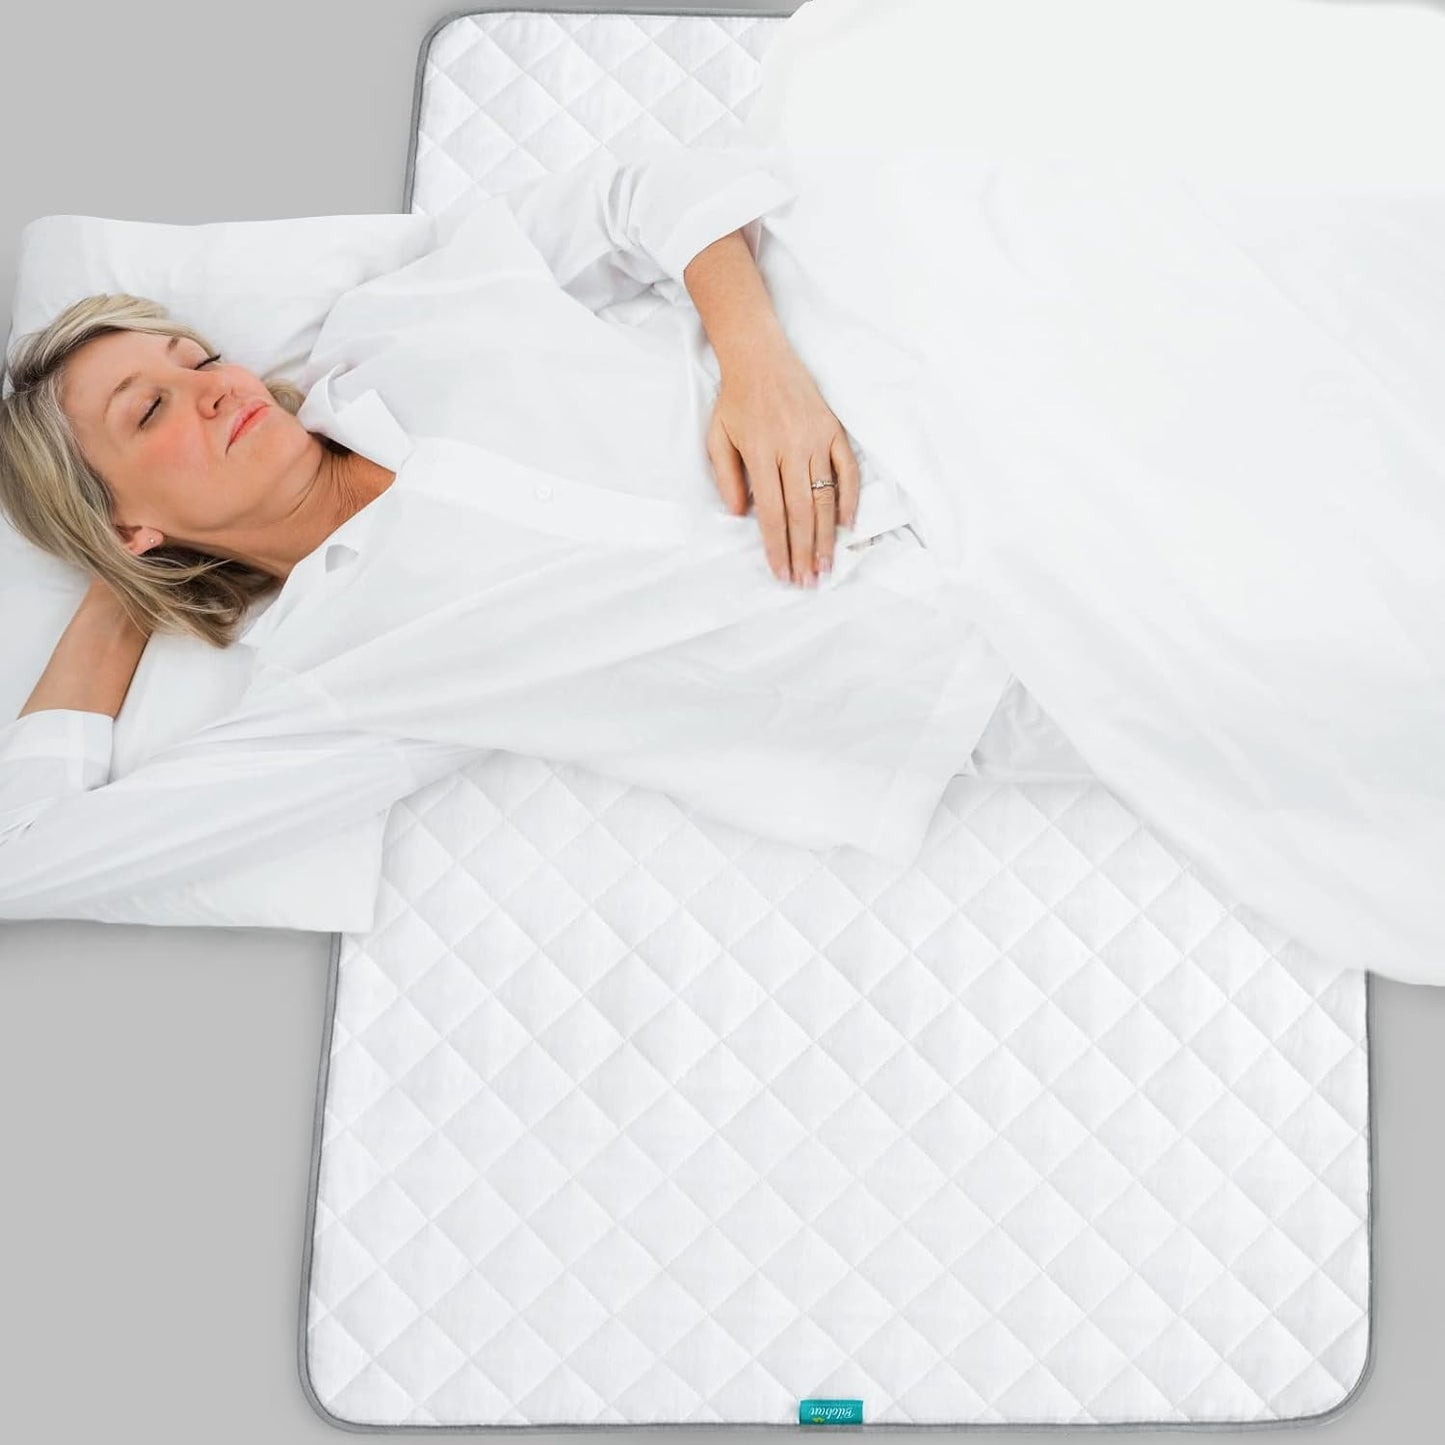 Waterproof Bed Pad/ Mat - 34" x 52", Quilted Protector with Cotton Surface and Non-slip Back for Adults, Kids and Pets, Machine Washable, White - Biloban Online Store